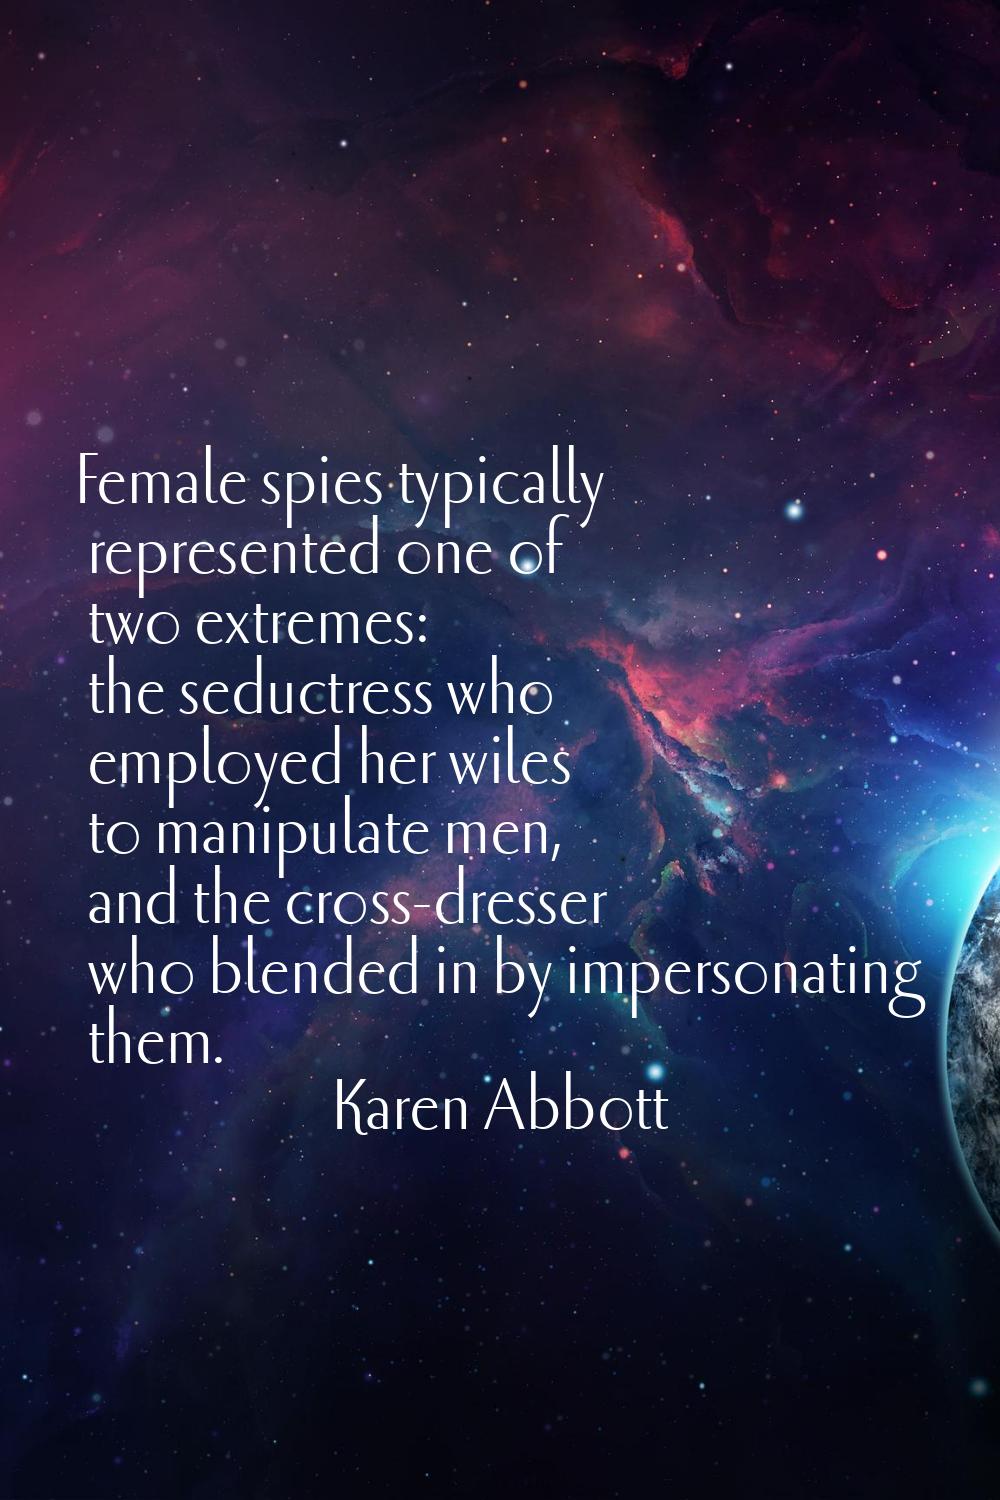 Female spies typically represented one of two extremes: the seductress who employed her wiles to ma